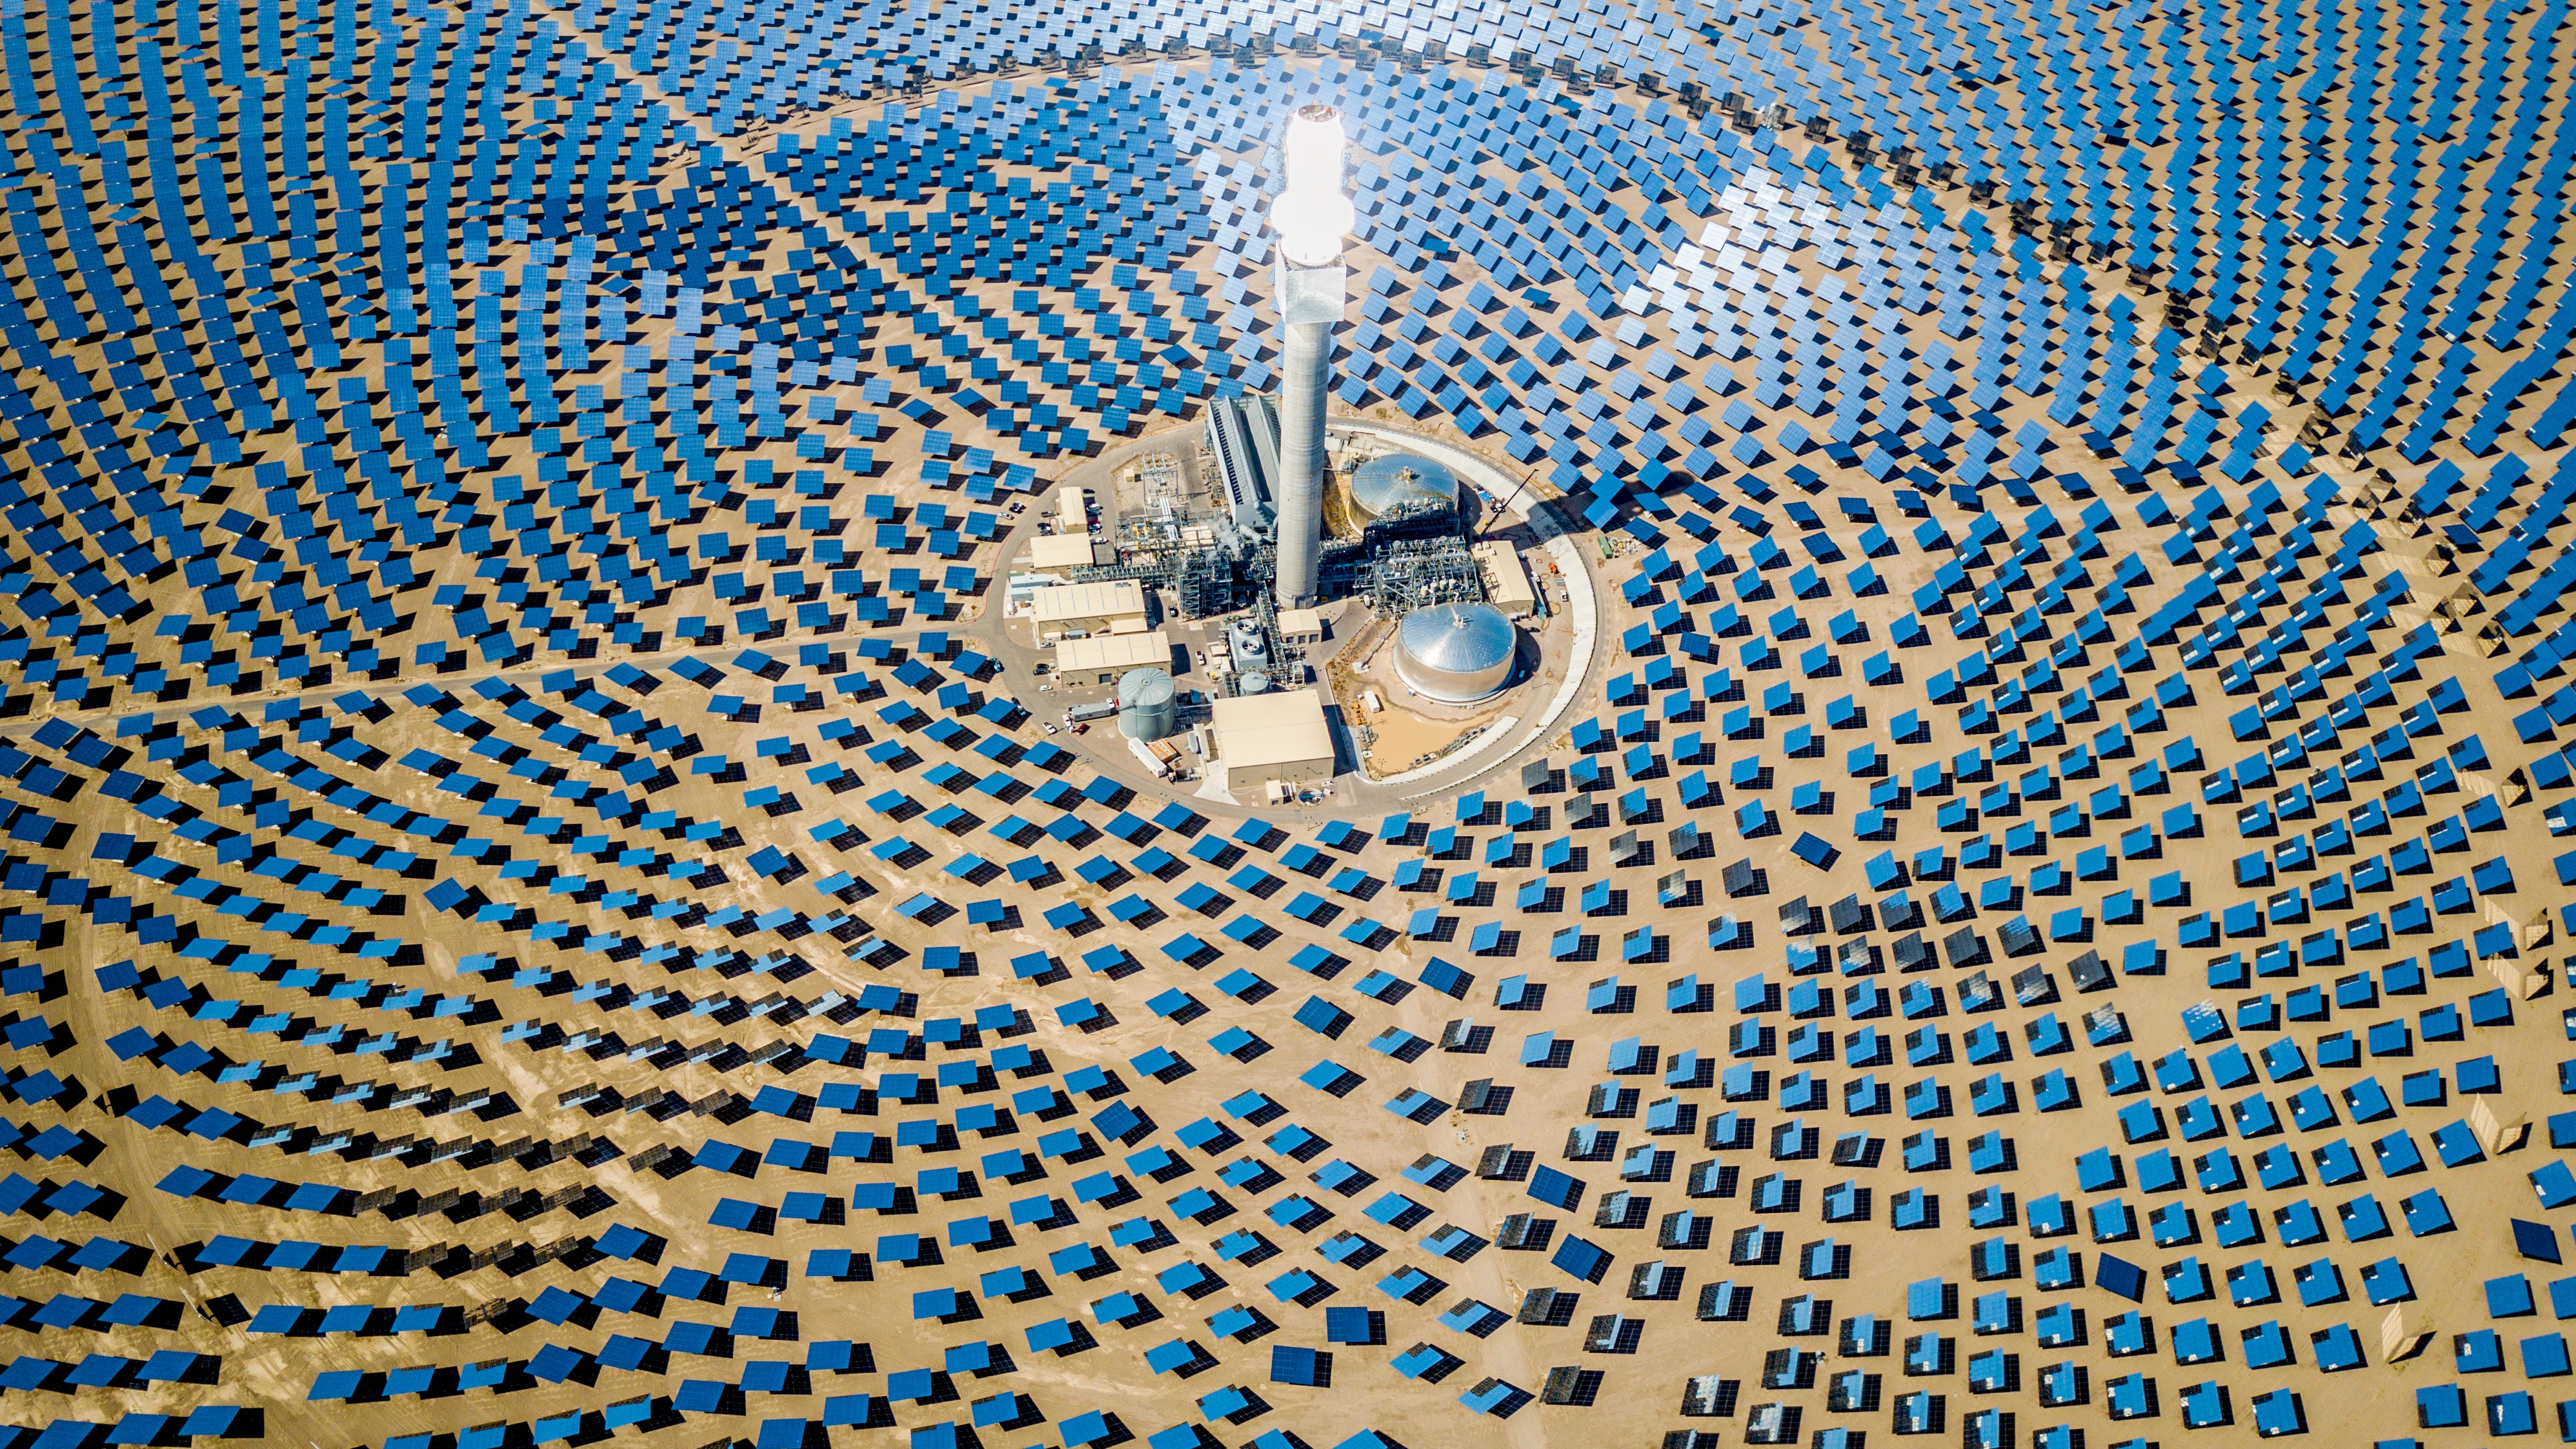 Solar thermal power plant station